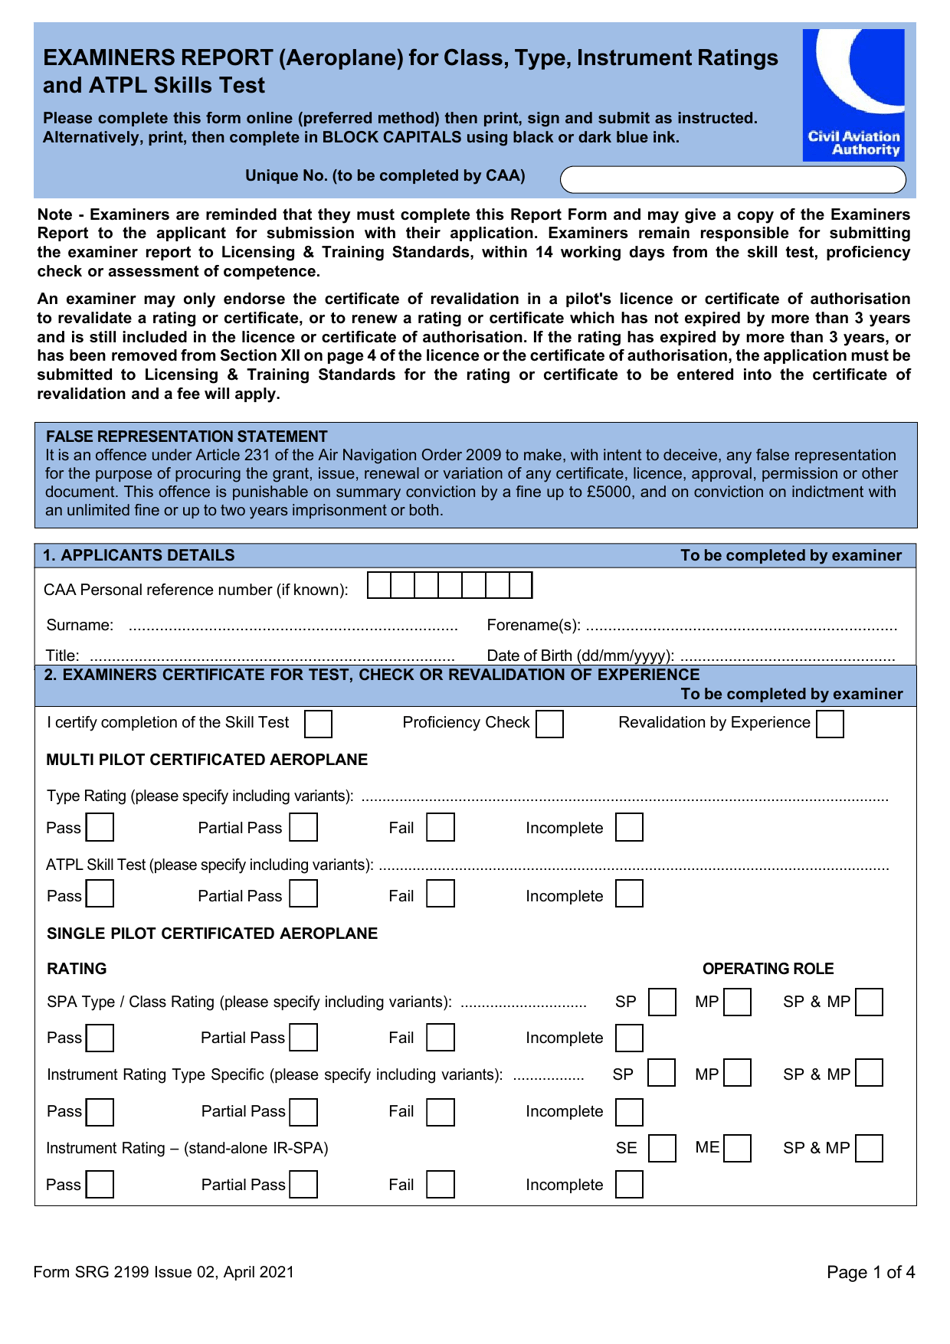 Form SRG2199 Examiners Report (Aeroplane) for Class, Type, Instrument Ratings and Atpl Skills Test - United Kingdom, Page 1